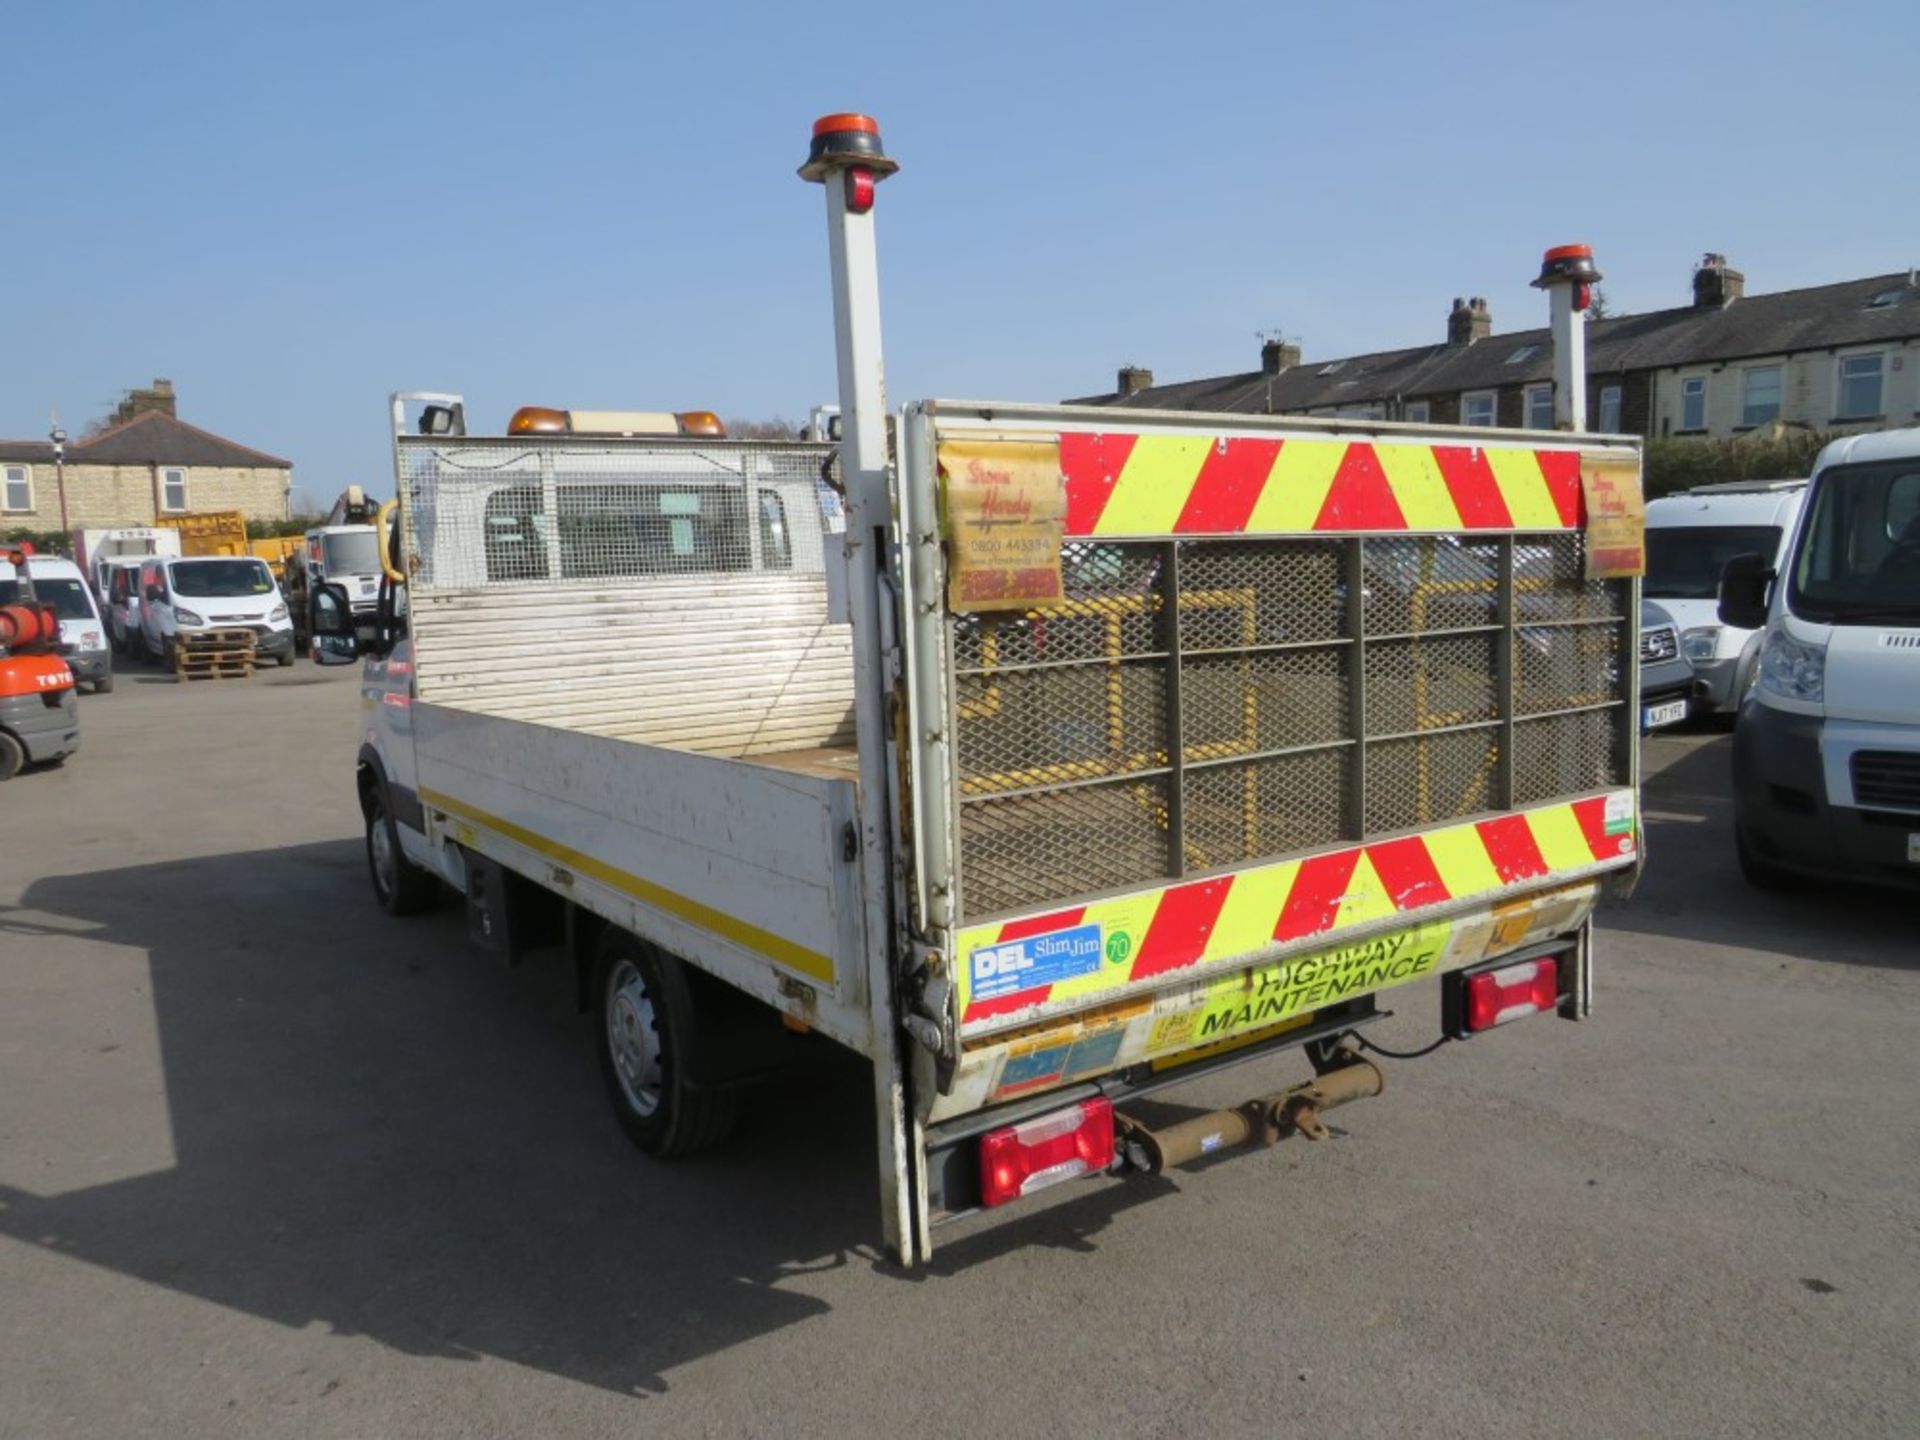 14 reg IVECO 35S13 DROPSIDE C/W TAIL LIFT, 1ST REG 03/14, TEST 03/22, 103921M WARRANTED, V5 HERE, - Image 3 of 6